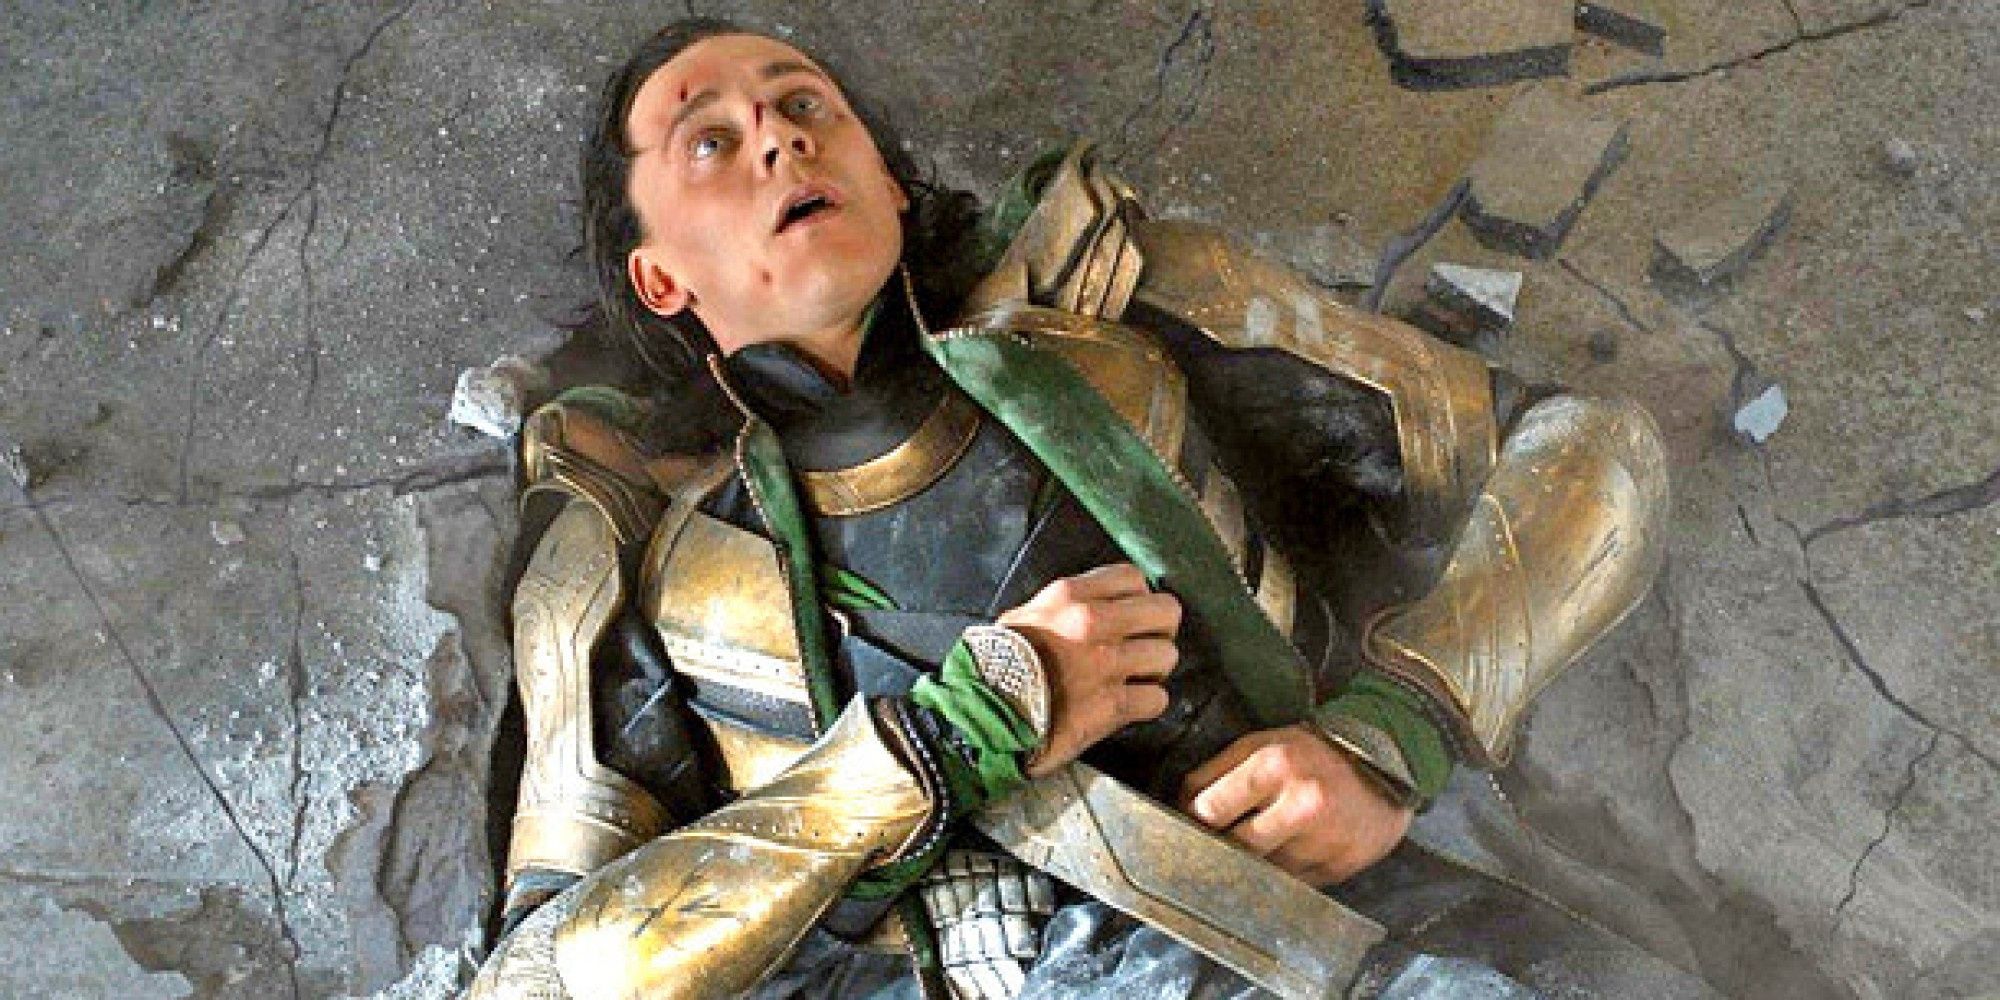 Loki after being wrecked by the Hulk